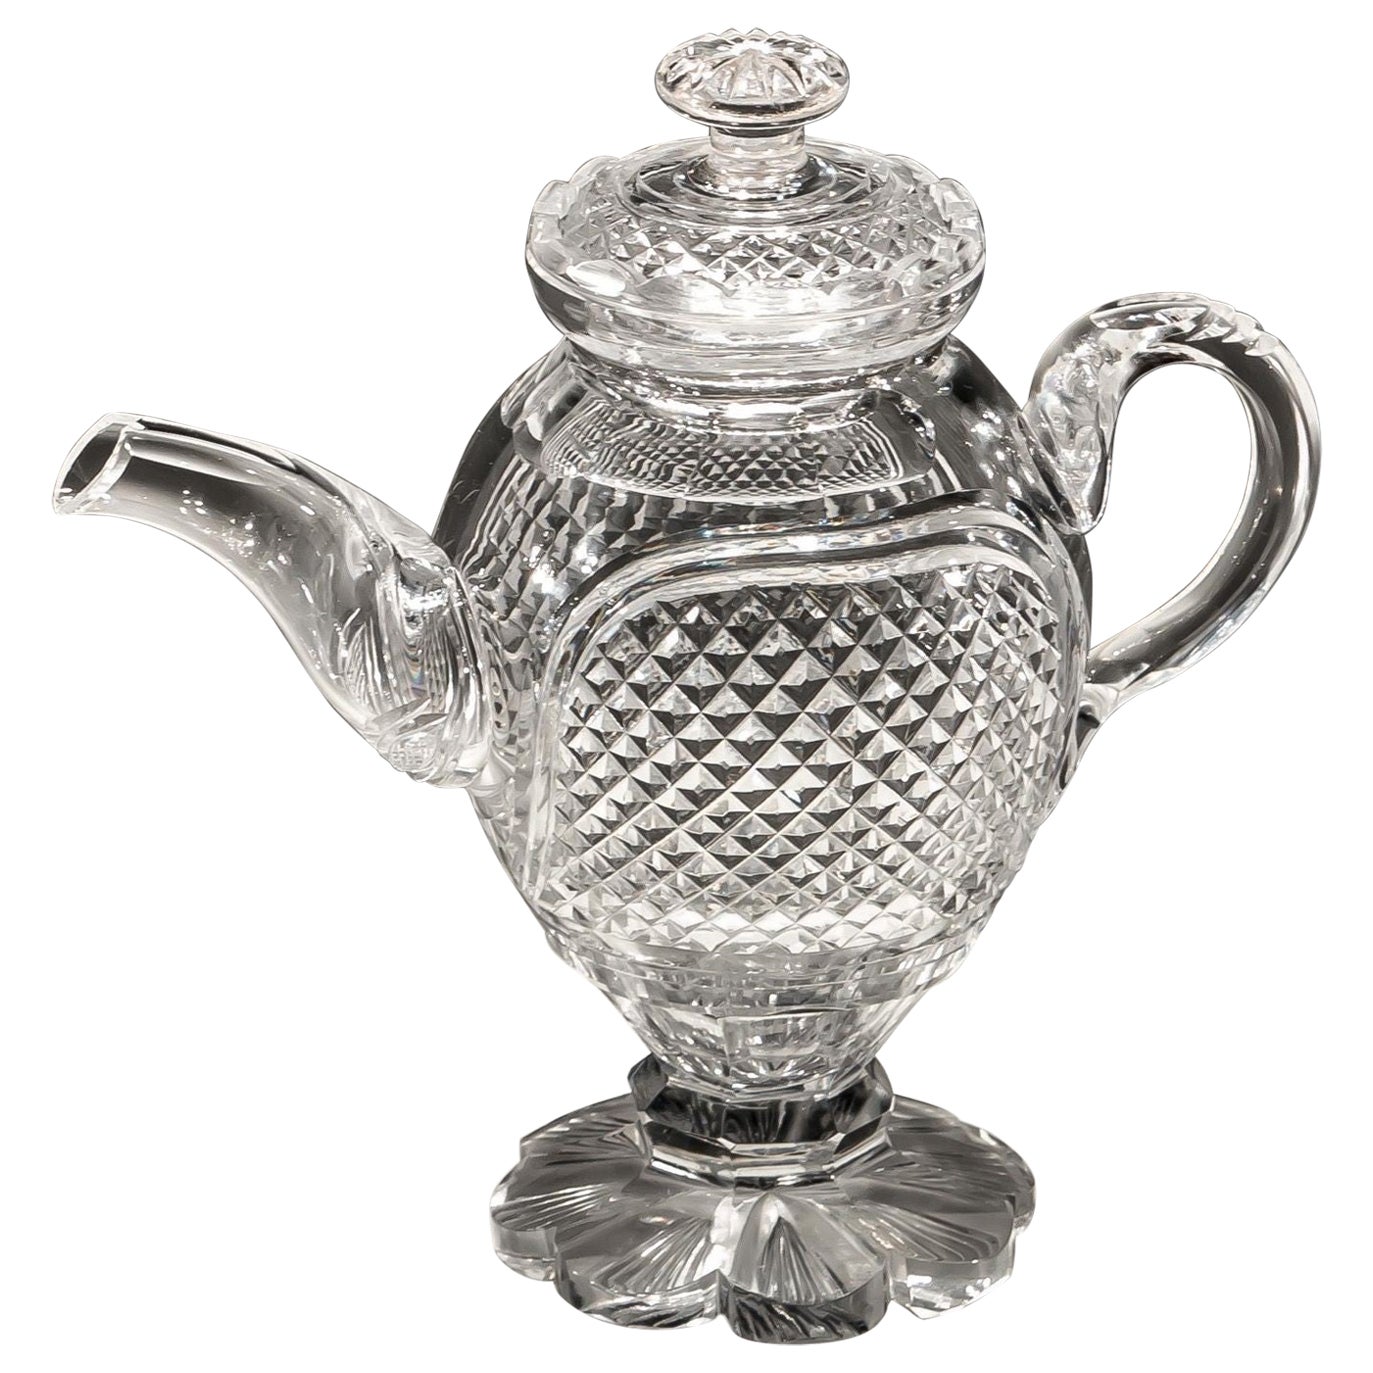 A Very Rare Glass Teapot  For Sale